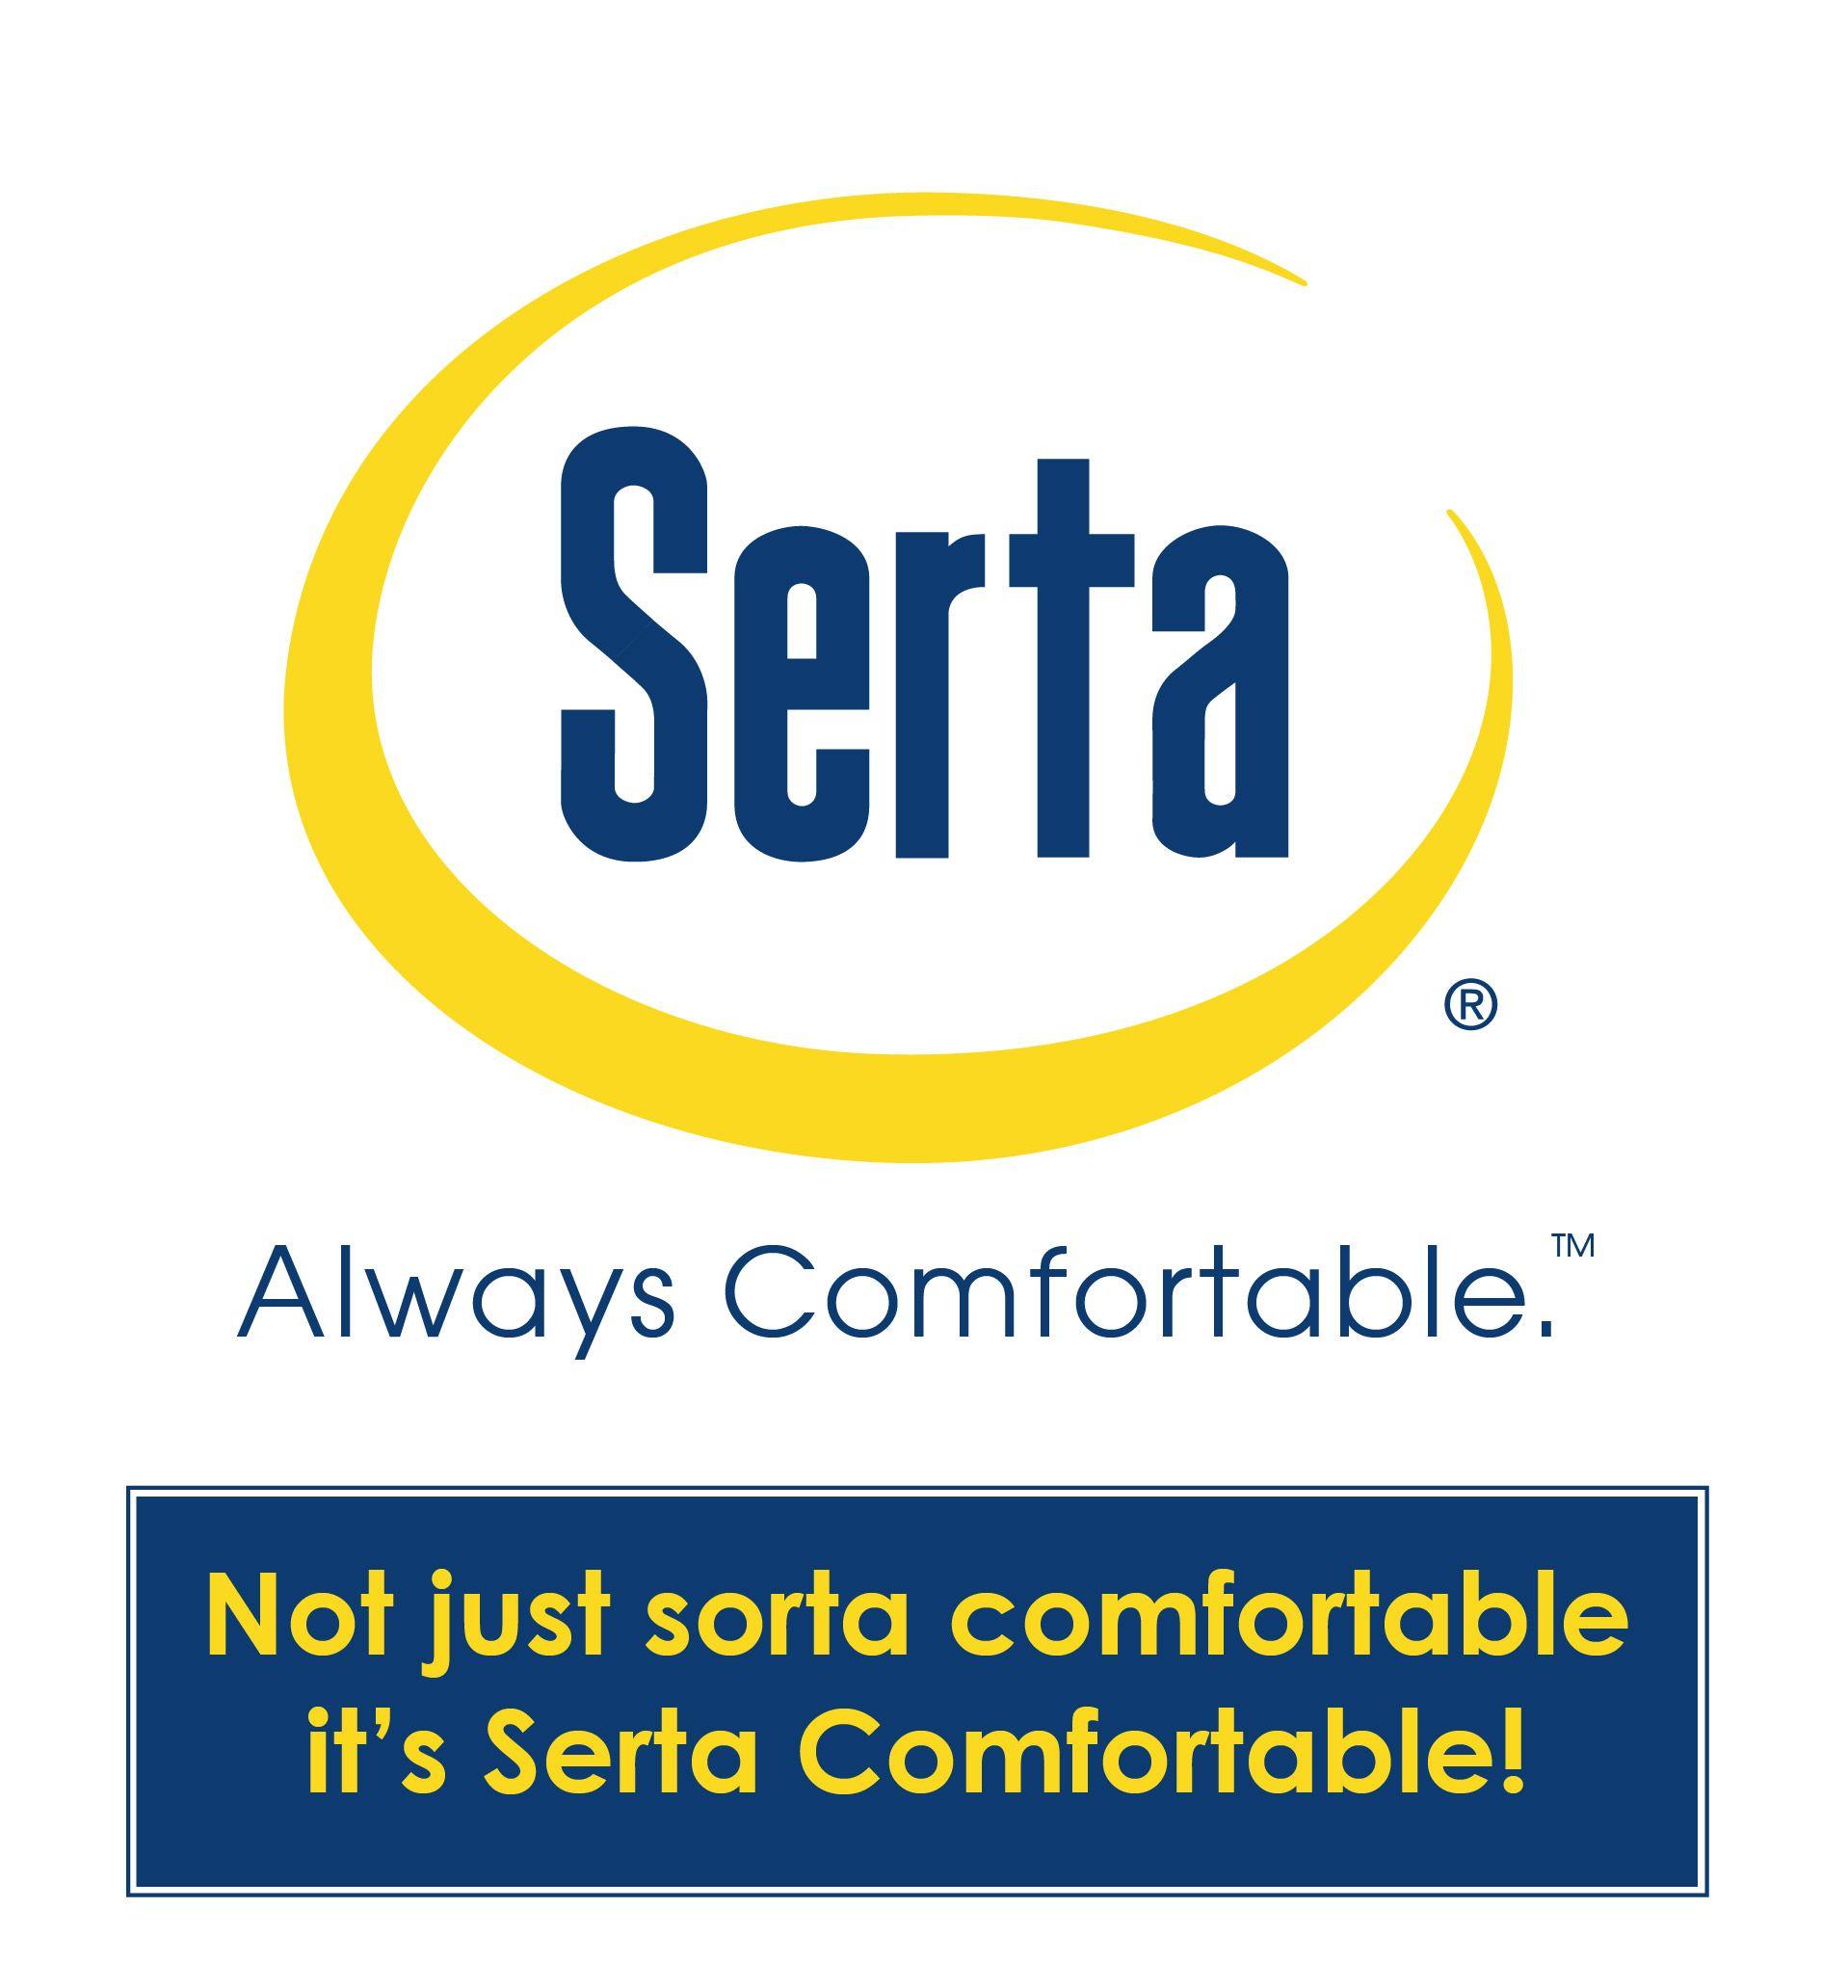 Serta Logo - Lifestyle Solutions design and manufacturing